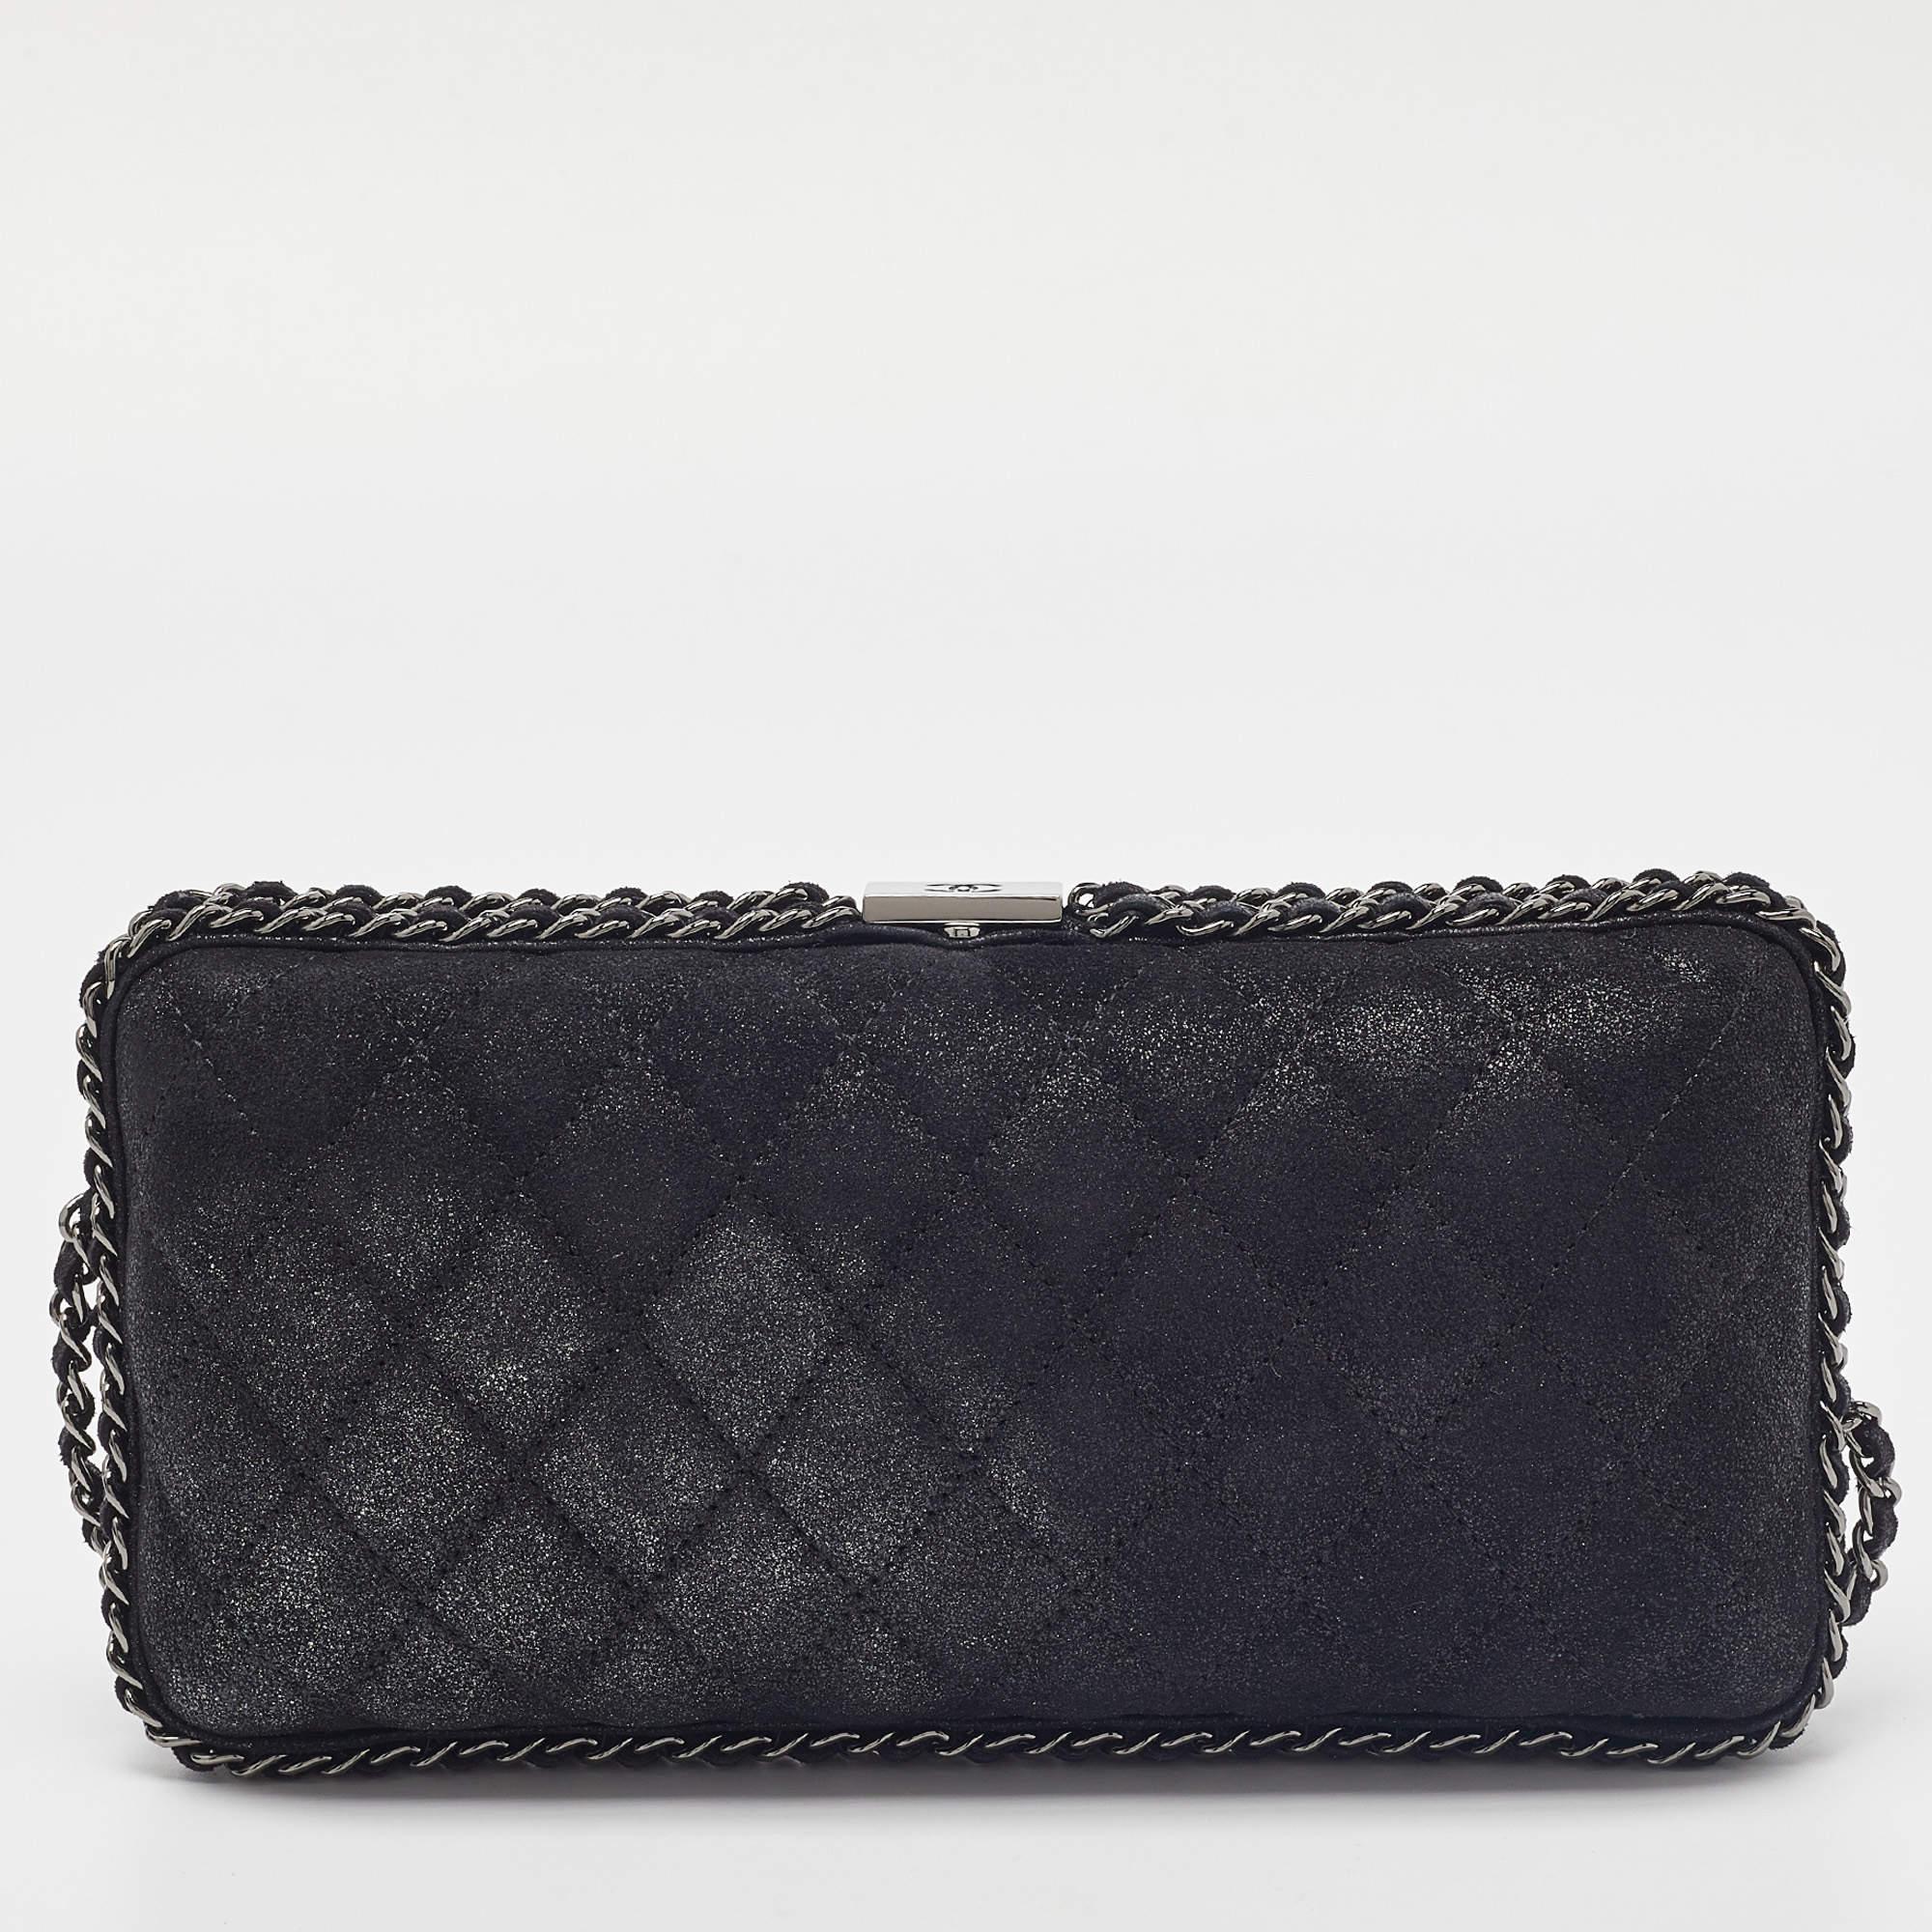 It does take a few seconds to believe that there could be anything as elegant as this clutch from Chanel! The clutch is perfect for your fashion arsenal, bringing along the iconic quilt pattern, signature CC on the lock, and a woven chain outlining